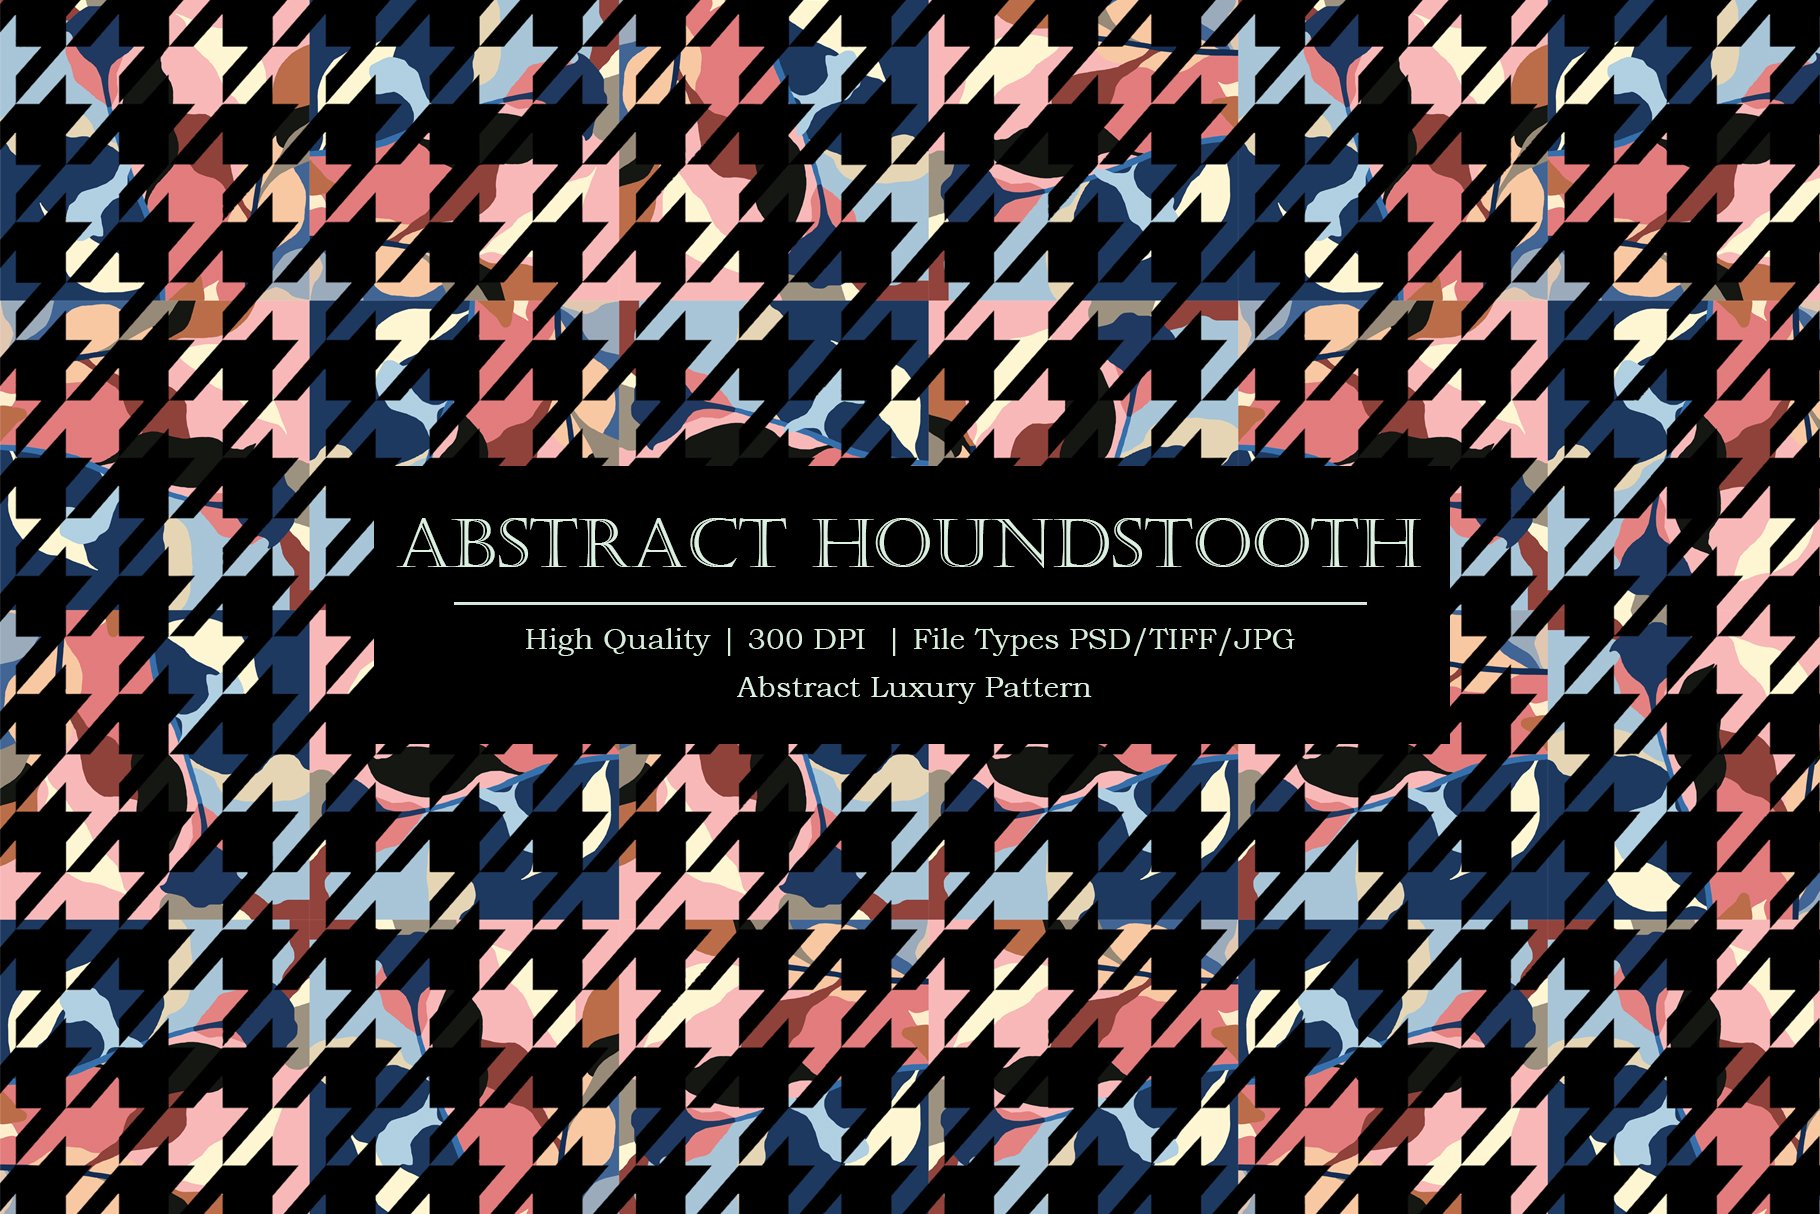 Abstract Houndstooth pattern cover image.